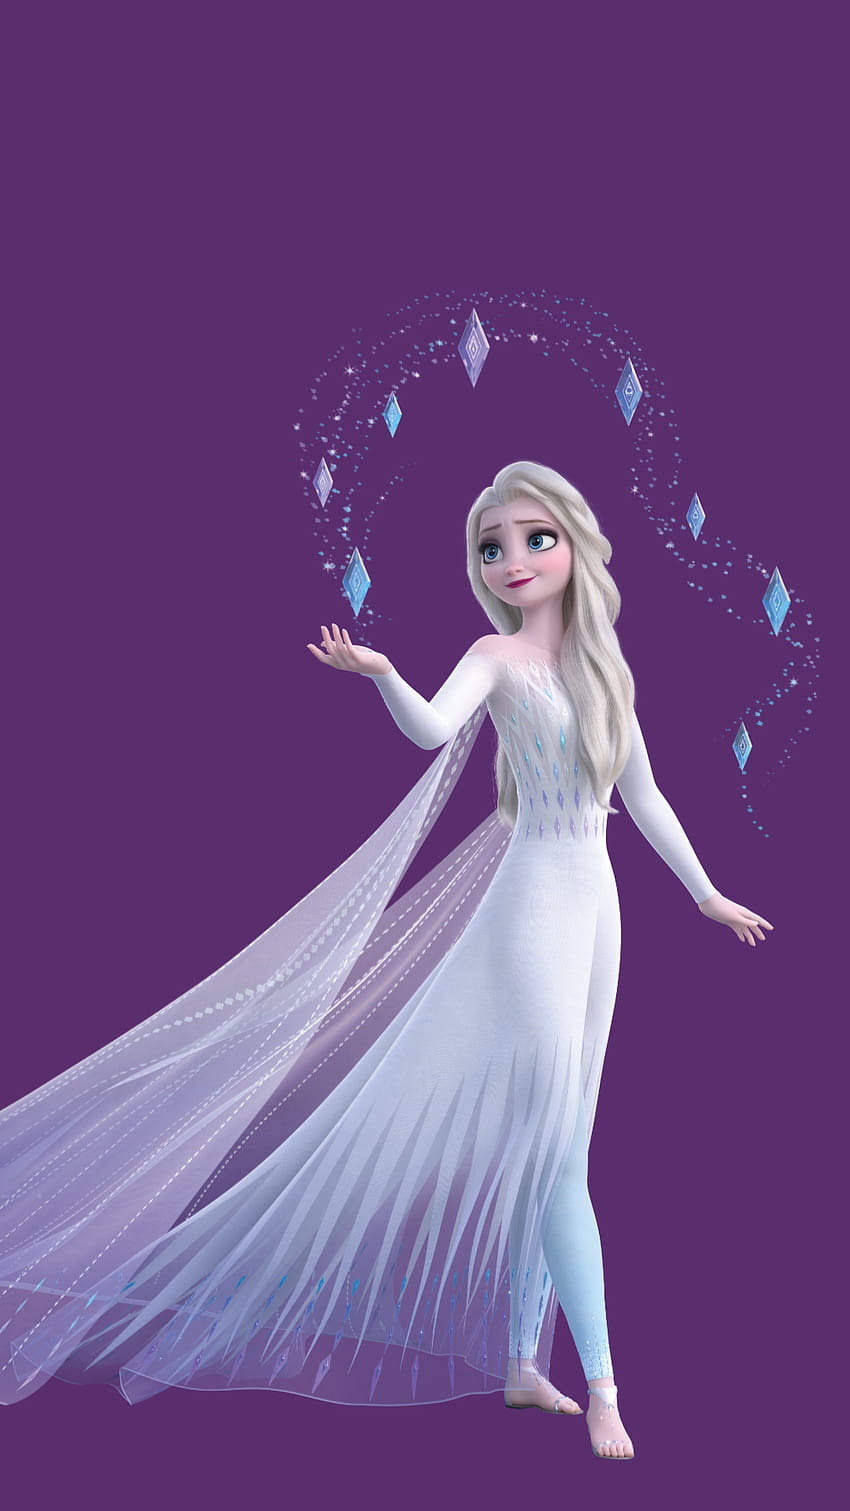 15 new Frozen 2 with Elsa in white dress and her hair down, frozen mobile HD phone wallpaper